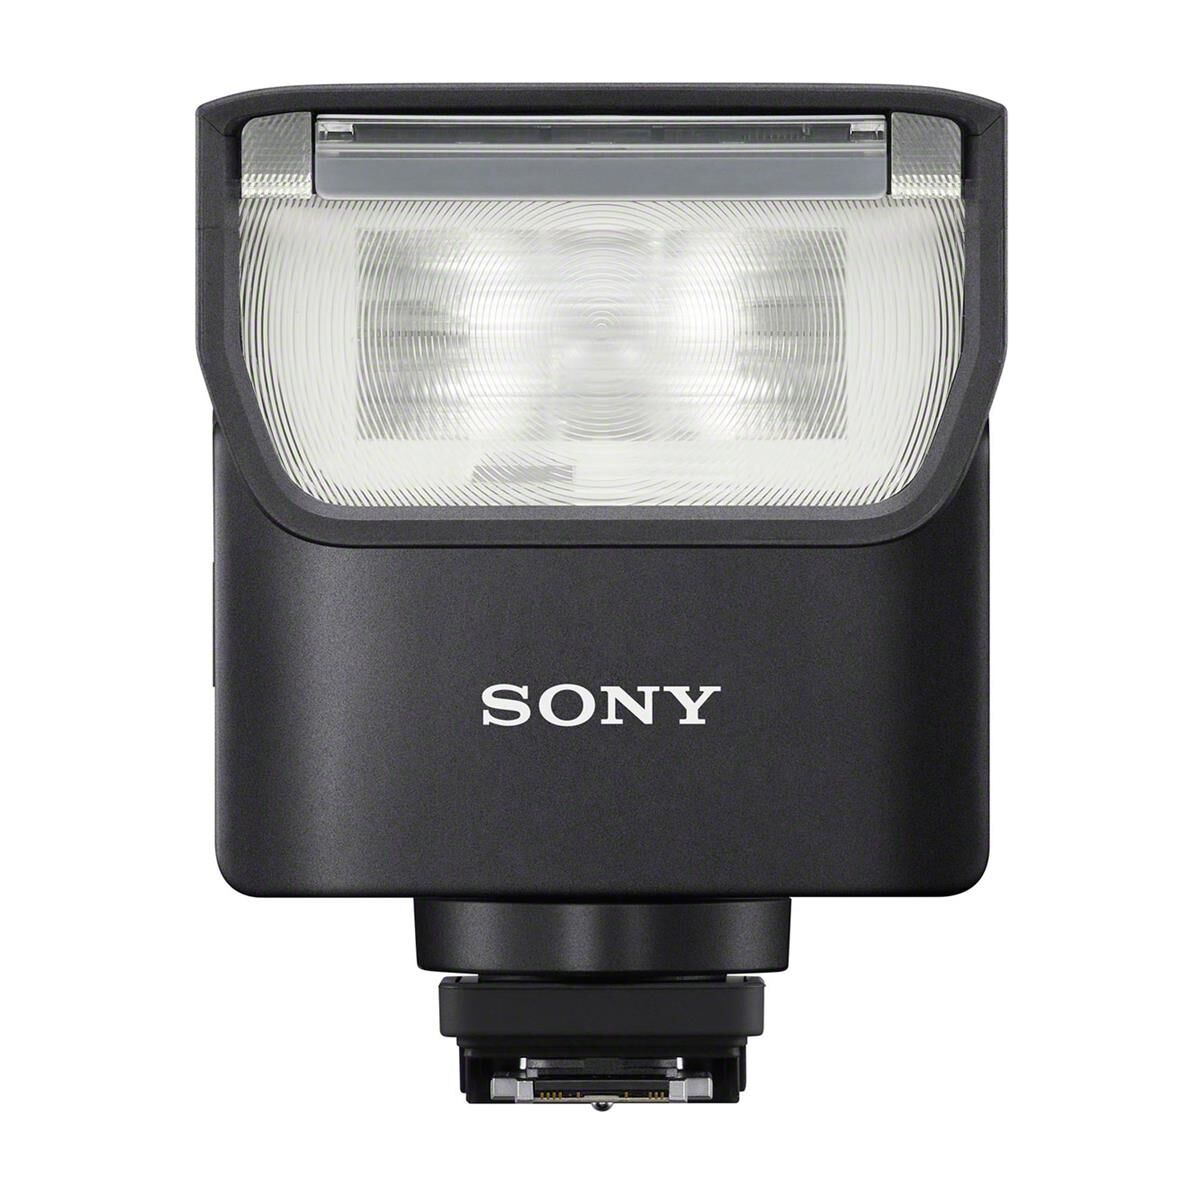 Sony Alpha HVL-F28RM External Flash with Wireless Remote Control